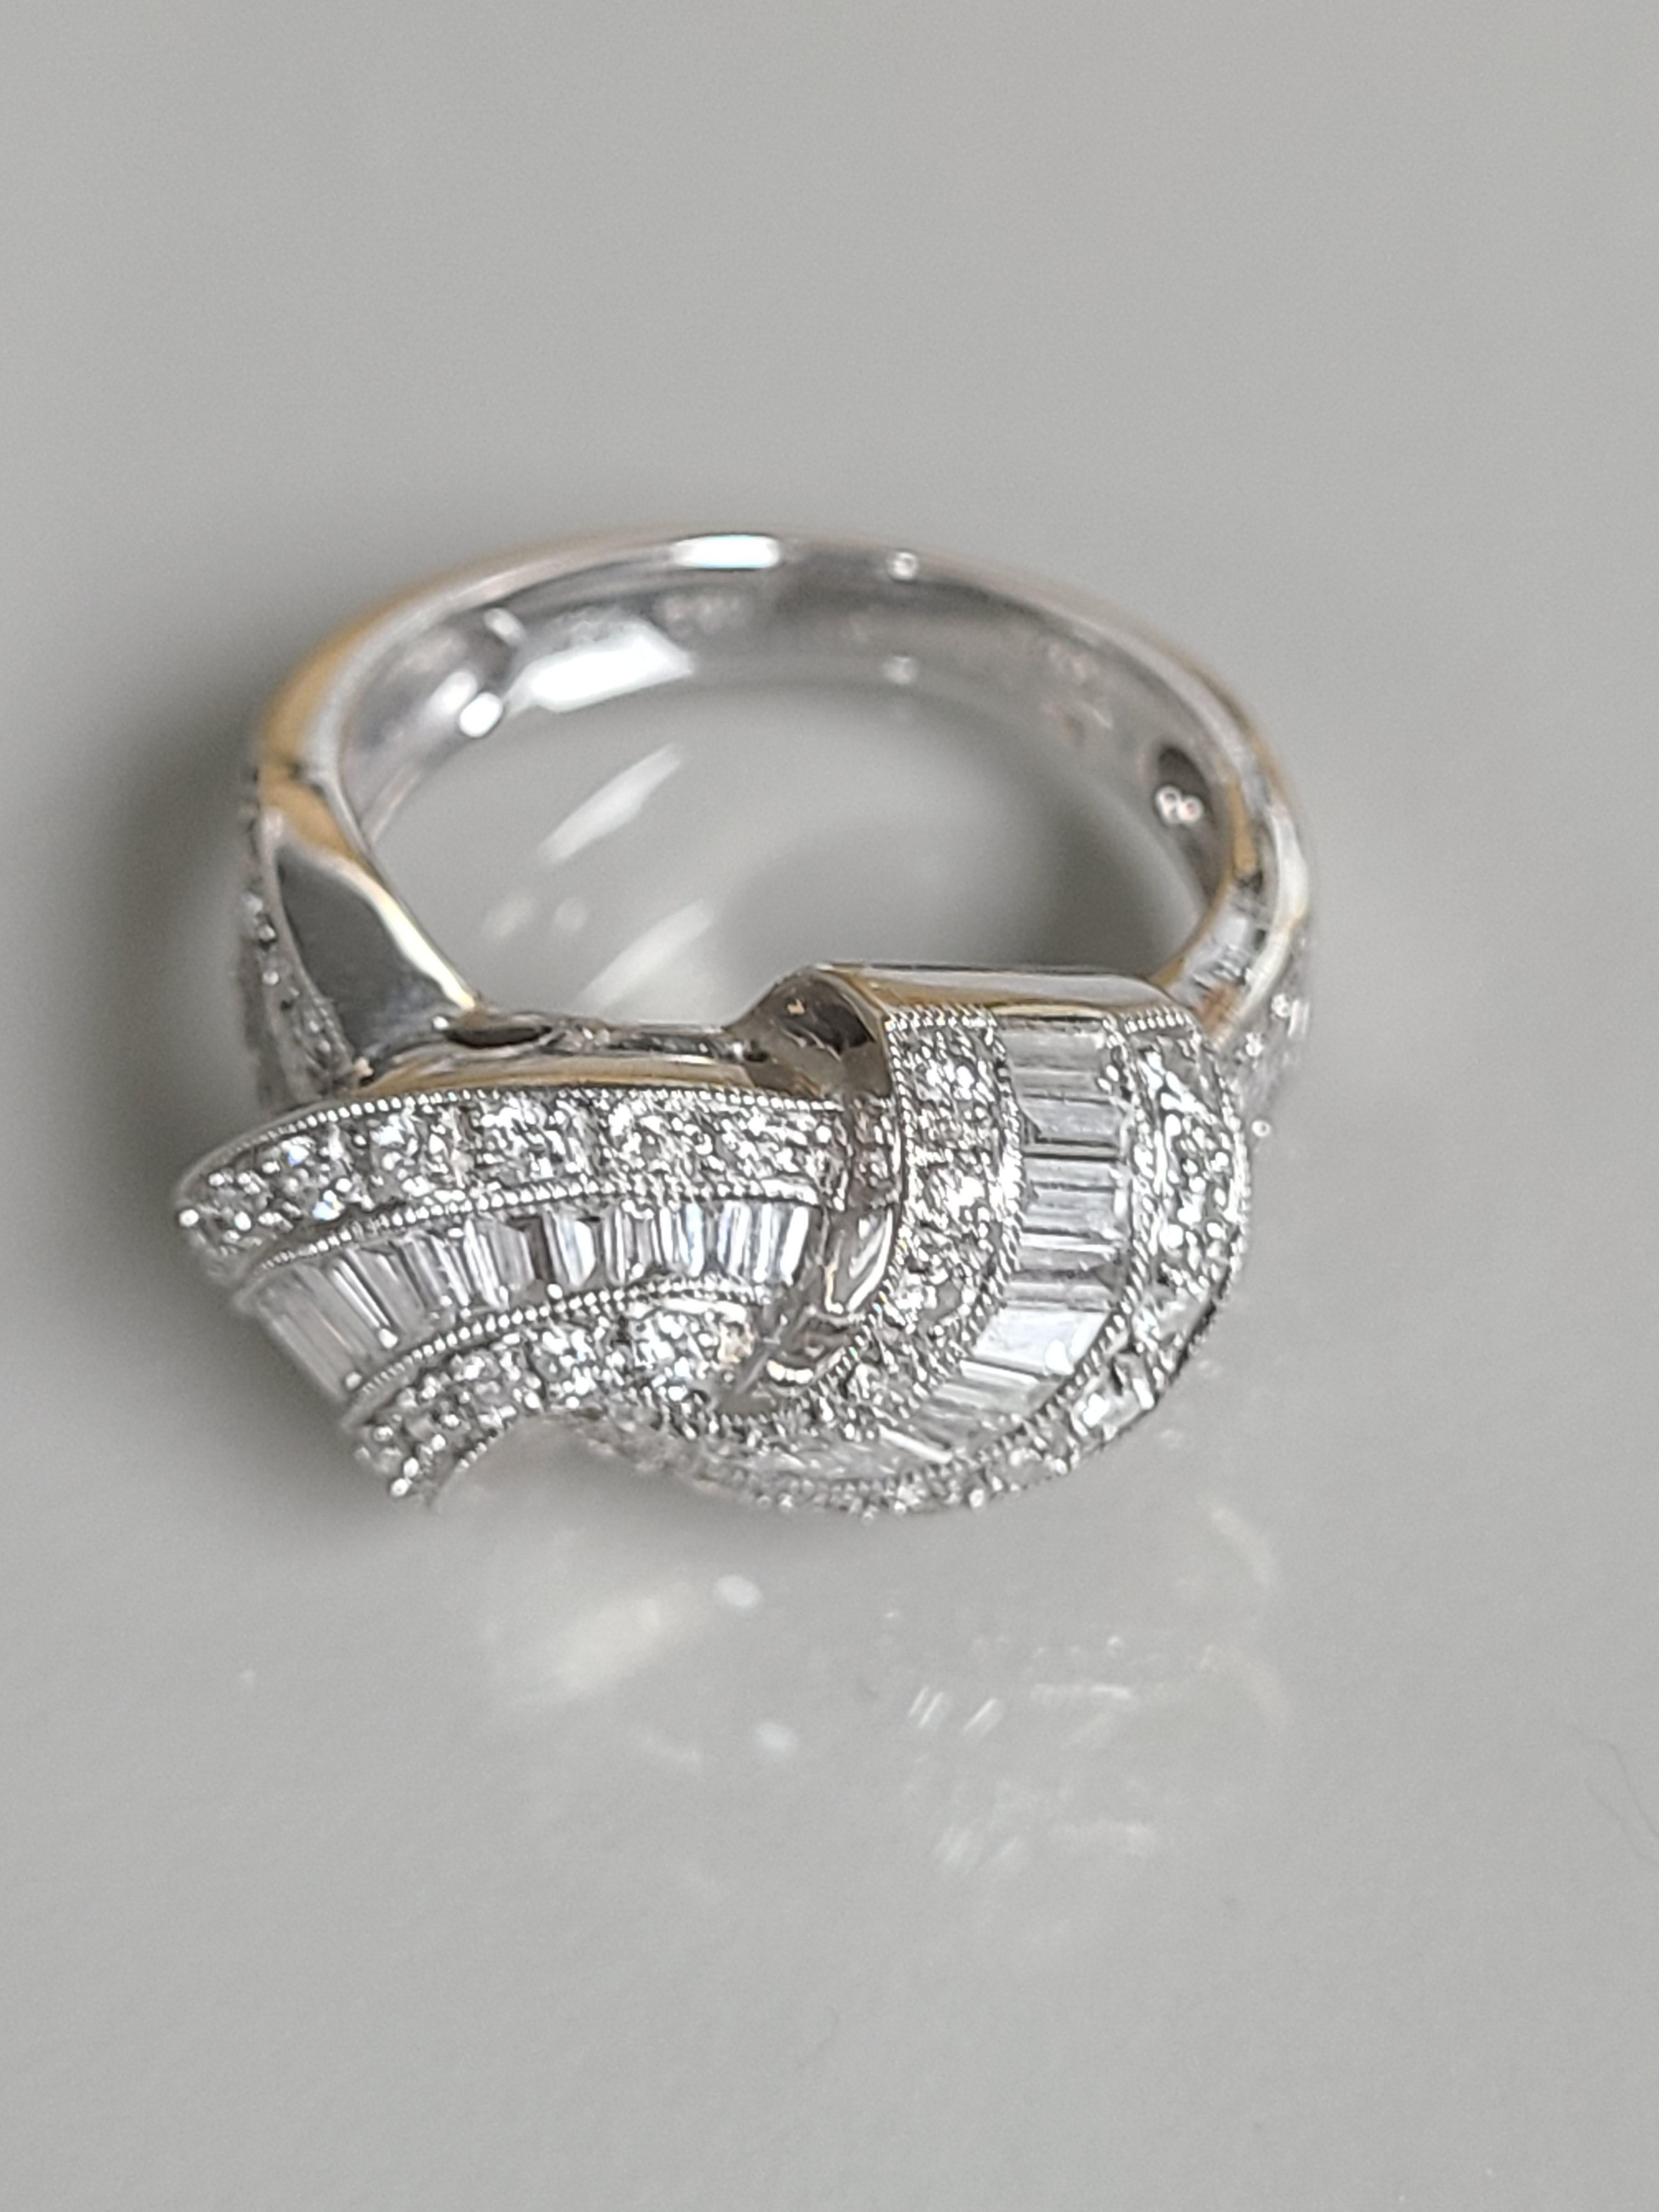 An Elegant diamond ring in art deco style made in 18k white gold. Combined diamond weight in the ring is 1.3 carats and gross weight of the ring is 6.2 grams. the ring dimensions in cm 1.2 x 2 x 2.2 (LXWXH). US size 5 3/4.